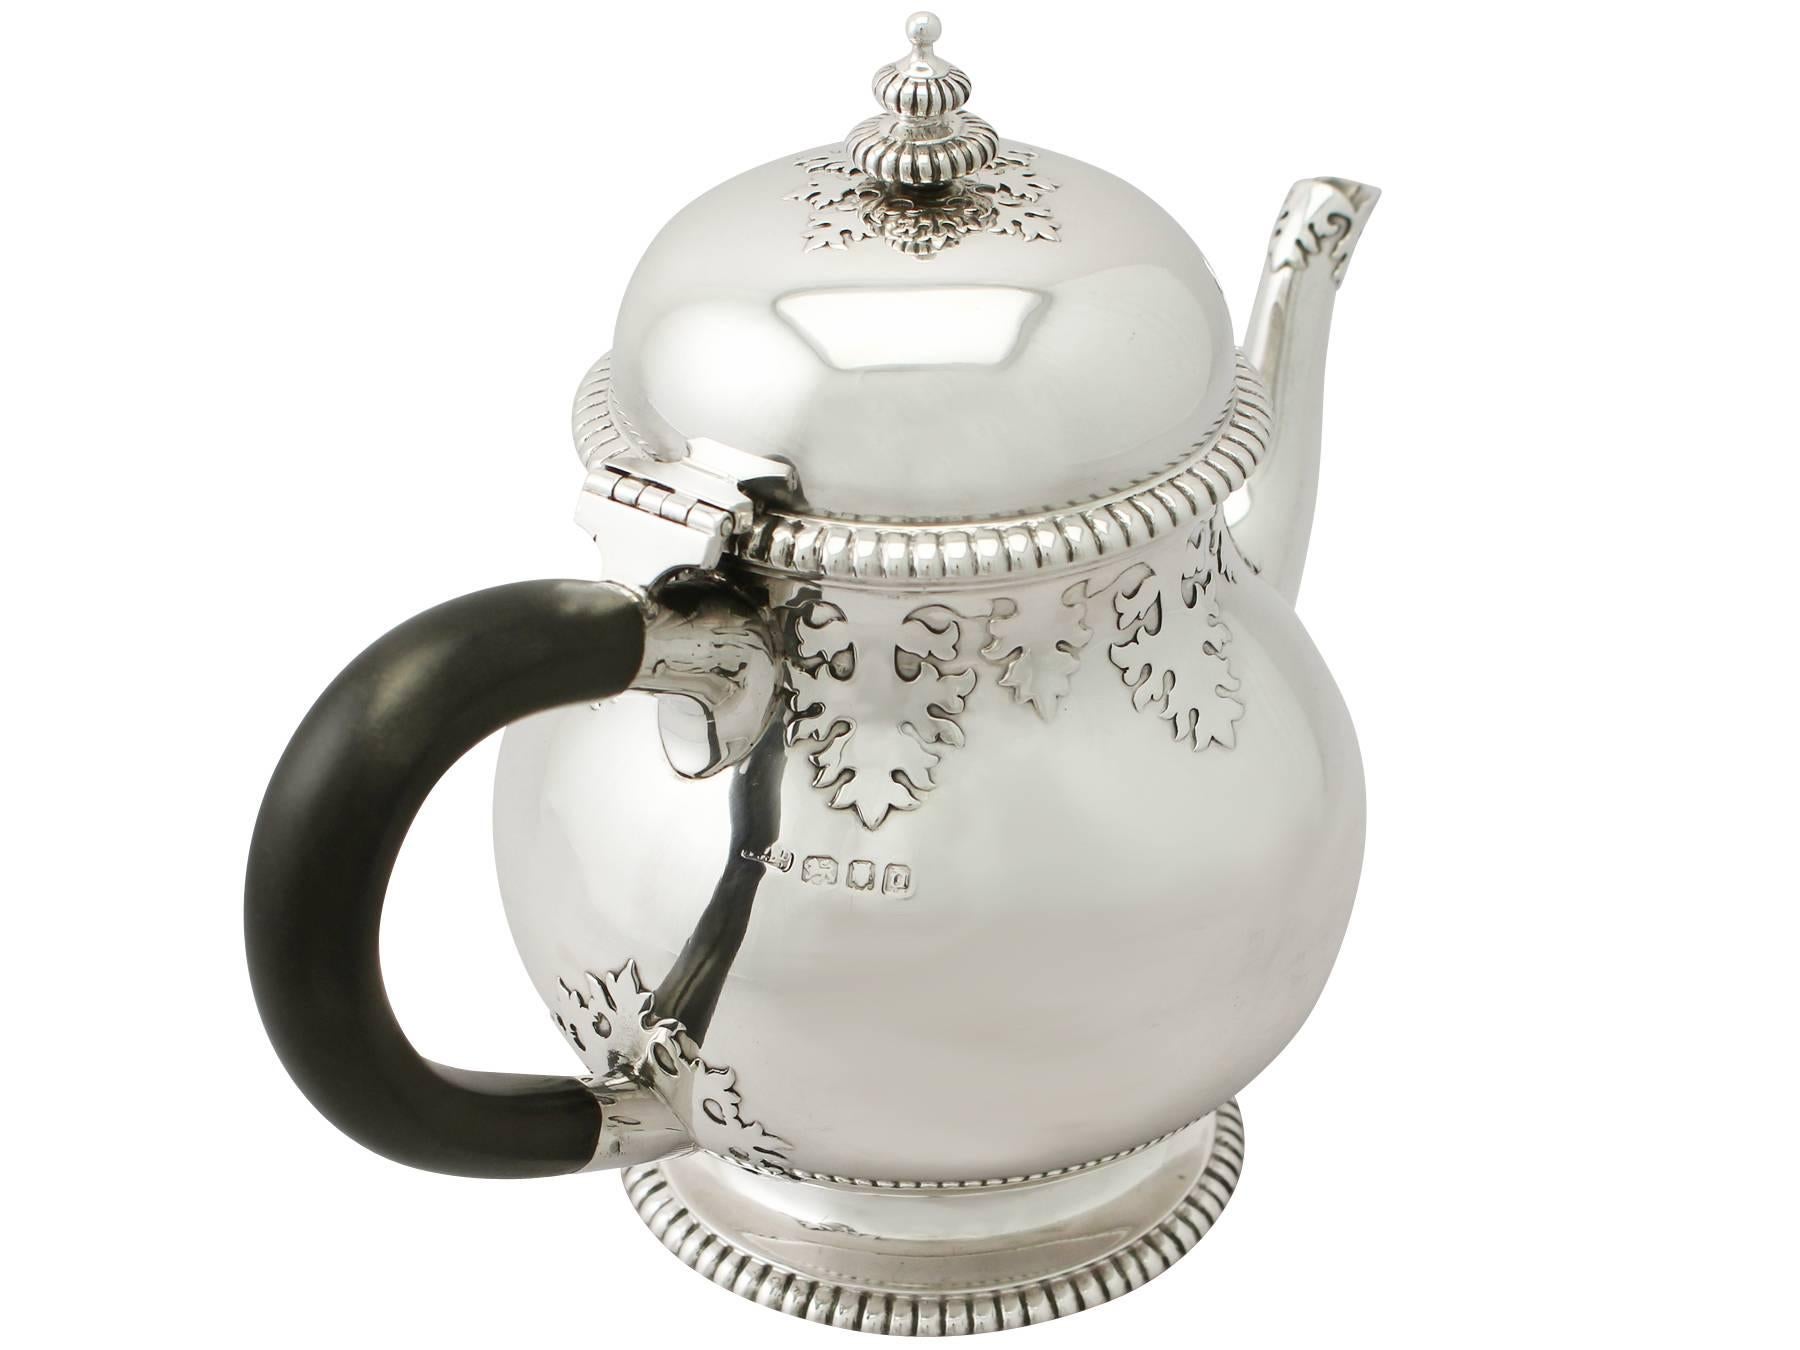 An exceptional, fine and impressive antique George V English sterling silver teapot; an addition to the silver teaware collection.

This exceptional George V English sterling silver teapot has a baluster shaped form.

The surface of this English